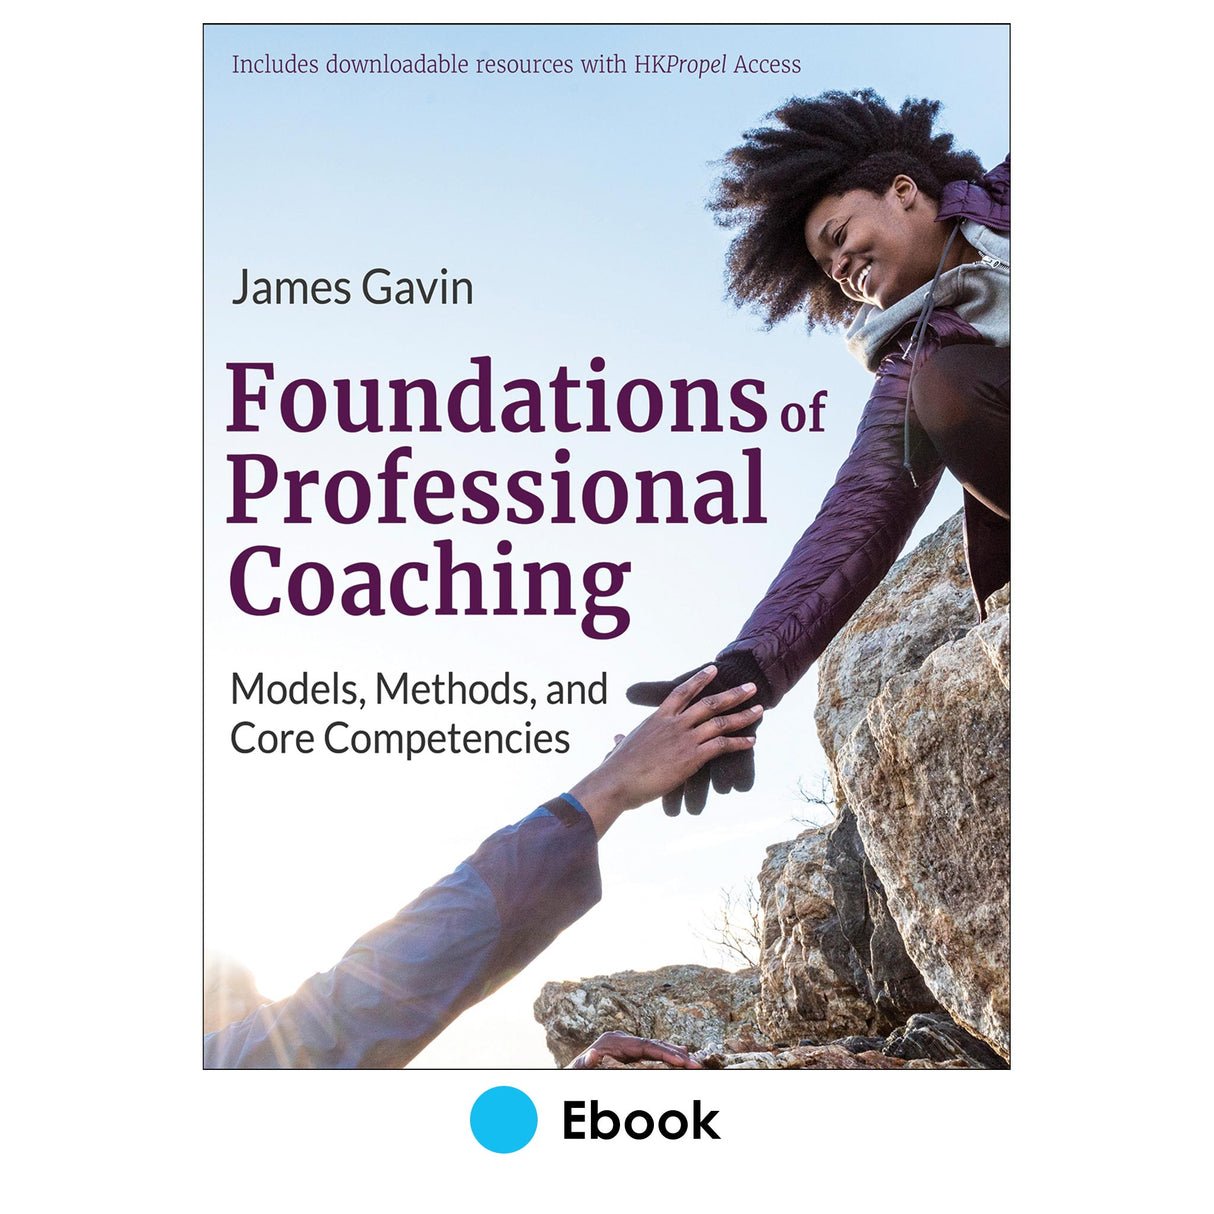 Foundations of Professional Coaching Ebook With HKPropel Access